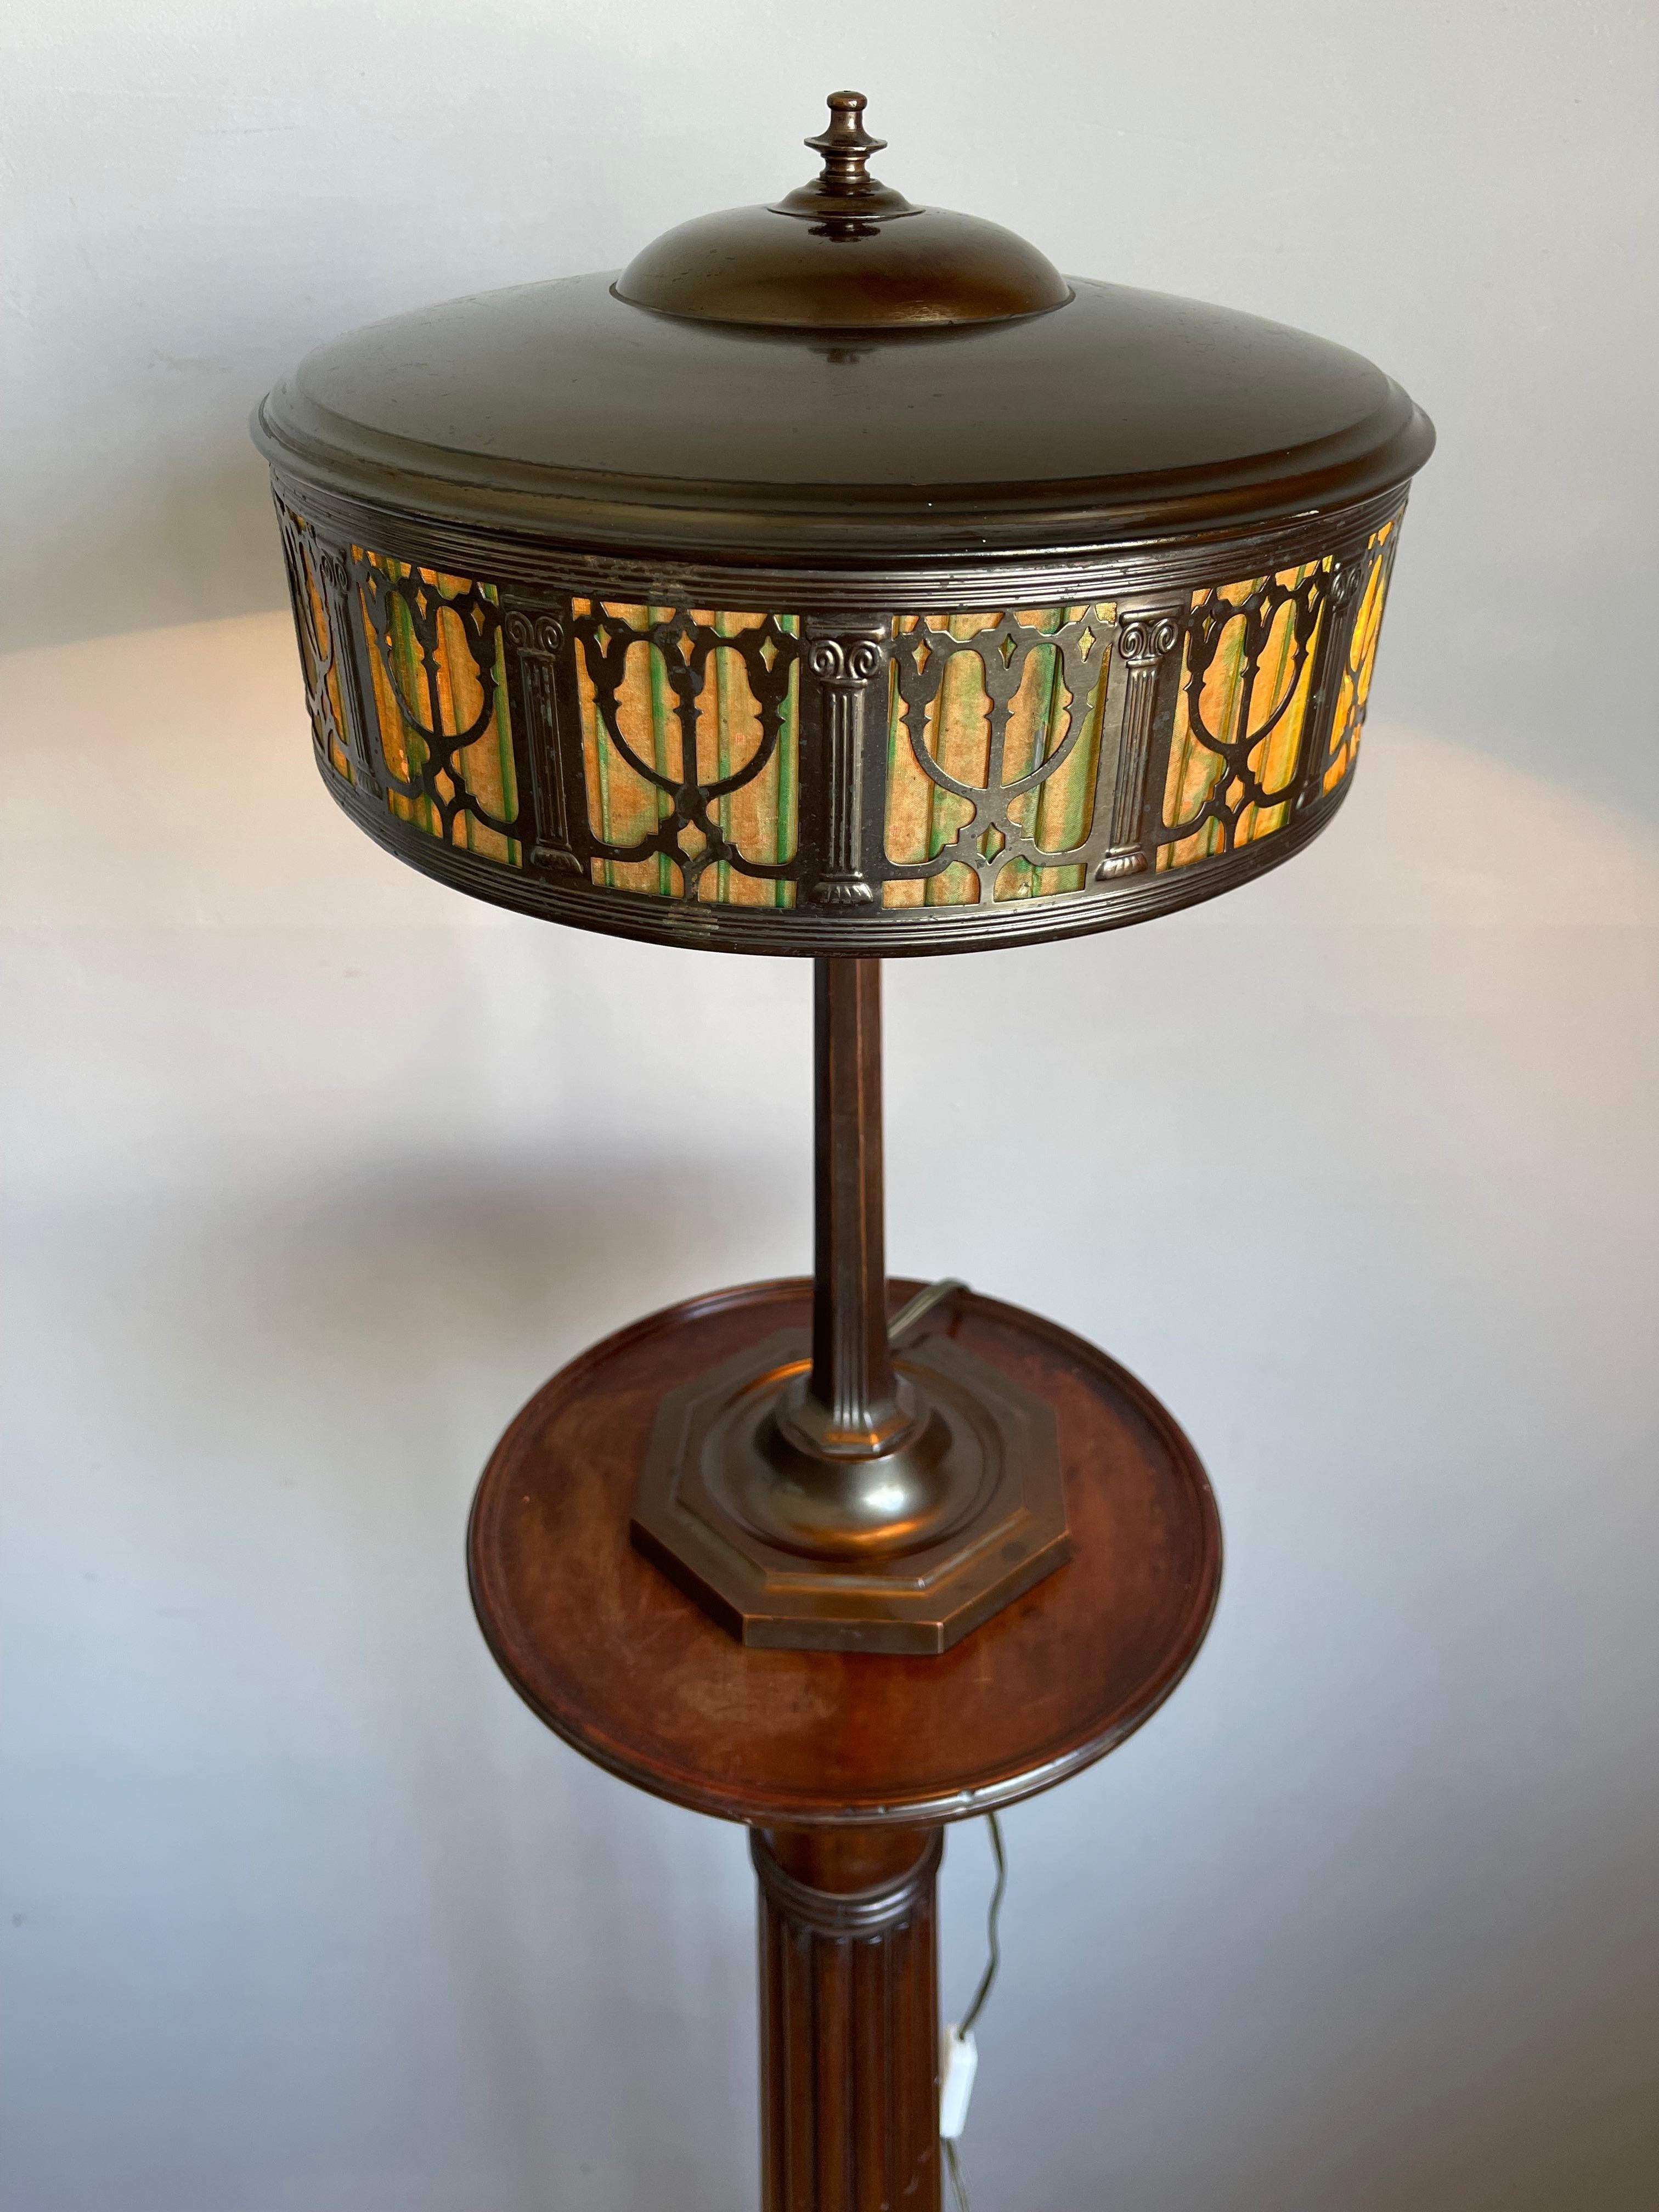 Patinated Highly Stylish and Timeless Design Arts and Crafts Era Bronze Table or Desk Lamp